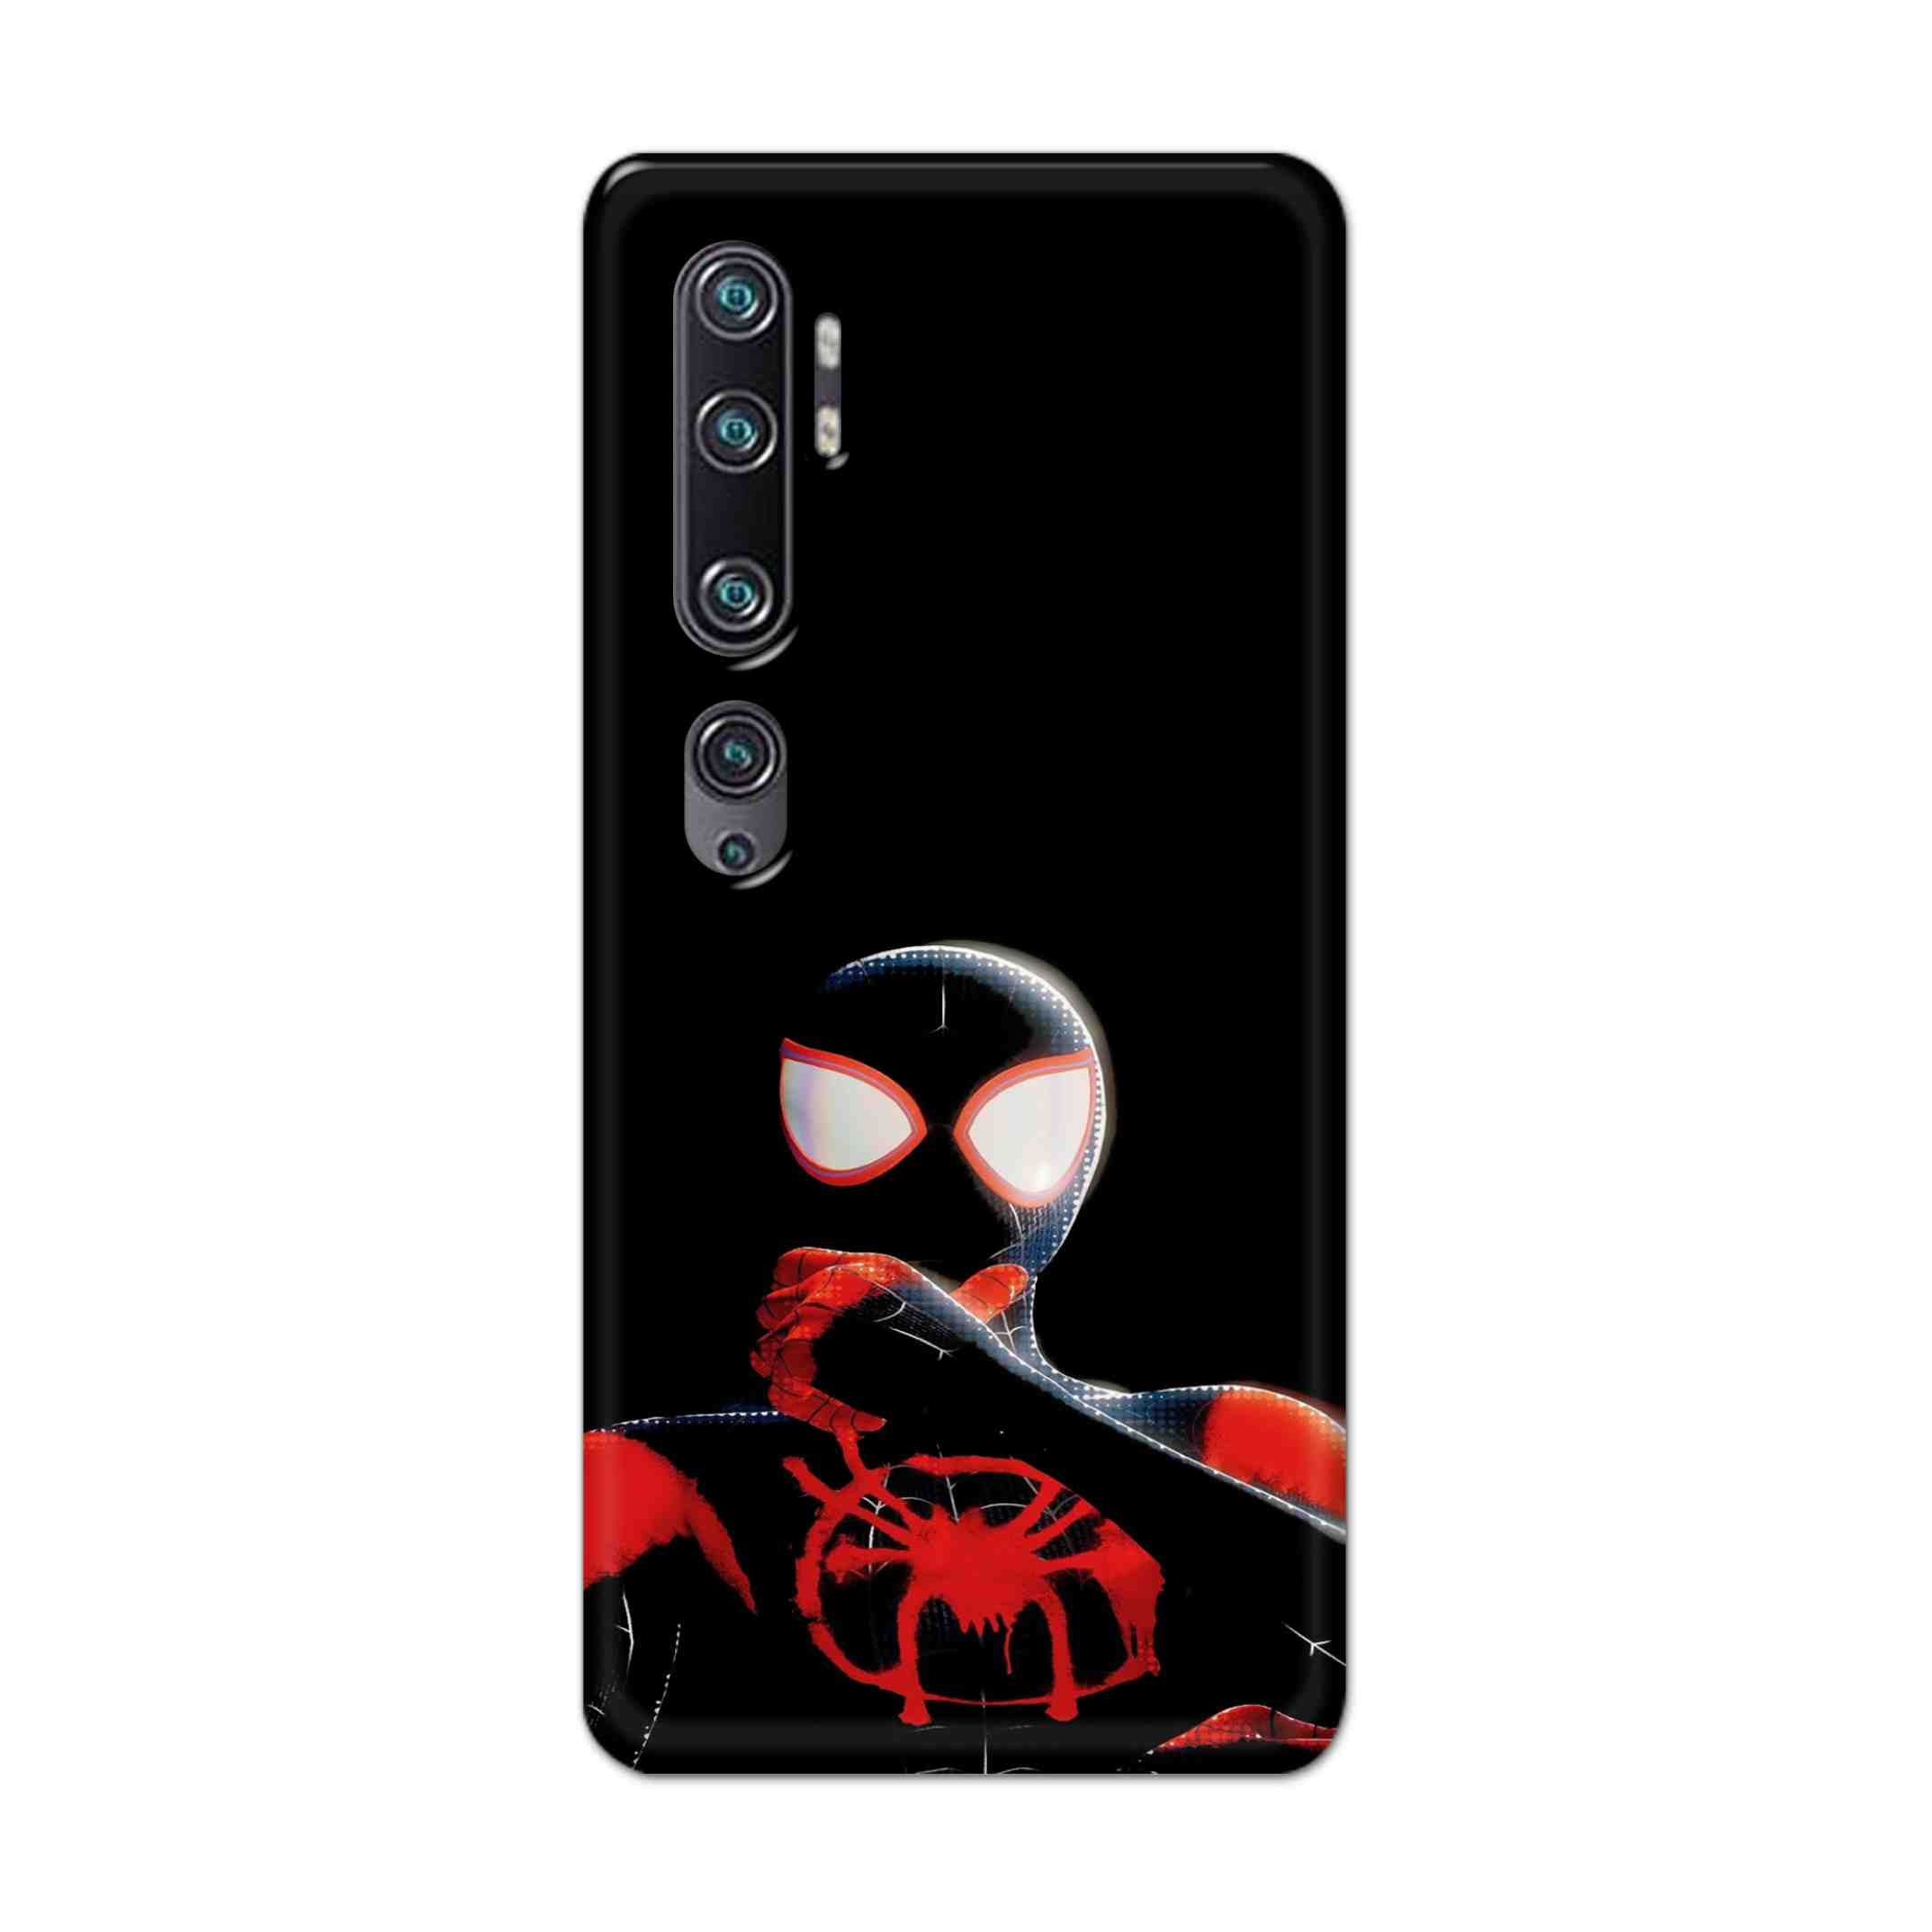 Buy Black Spiderman Hard Back Mobile Phone Case Cover For Xiaomi Mi Note 10 Online